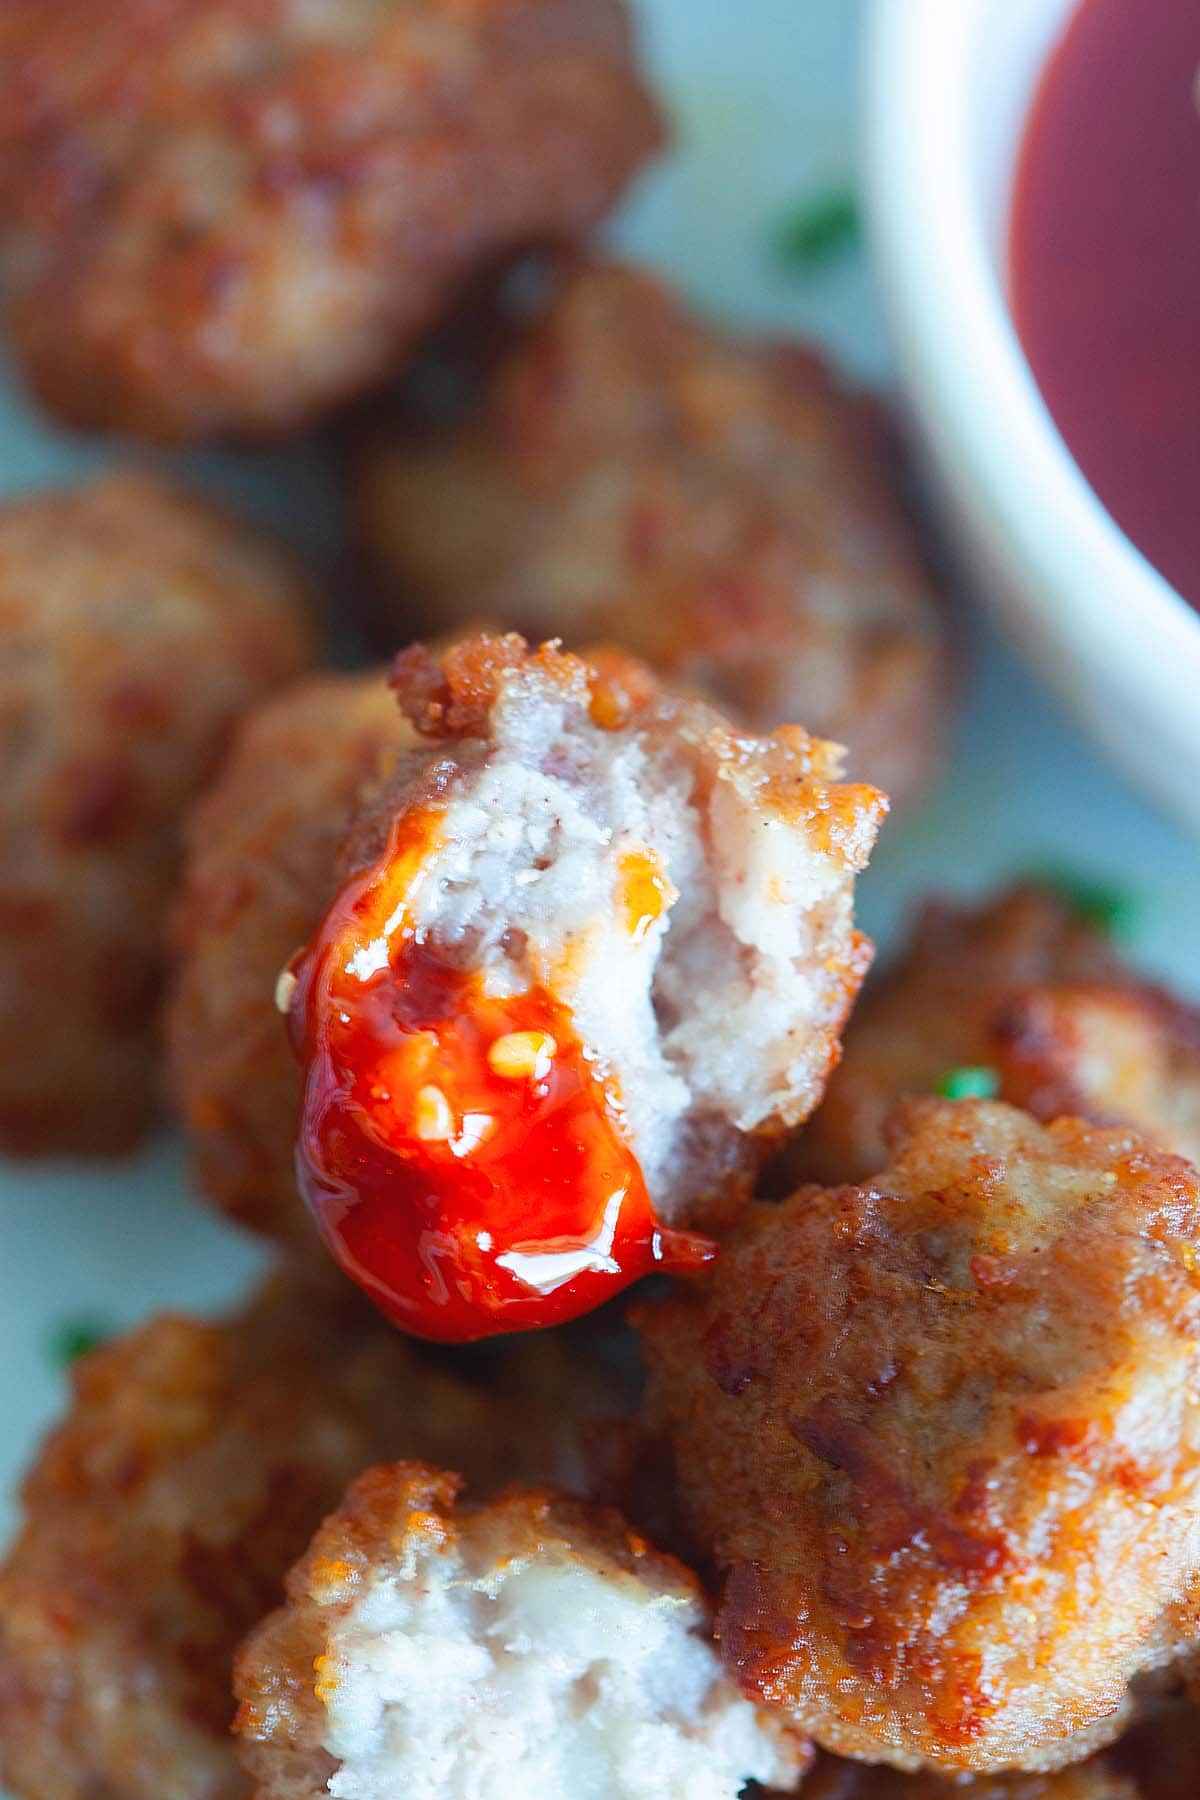 Fried meatballs, ready to serve.